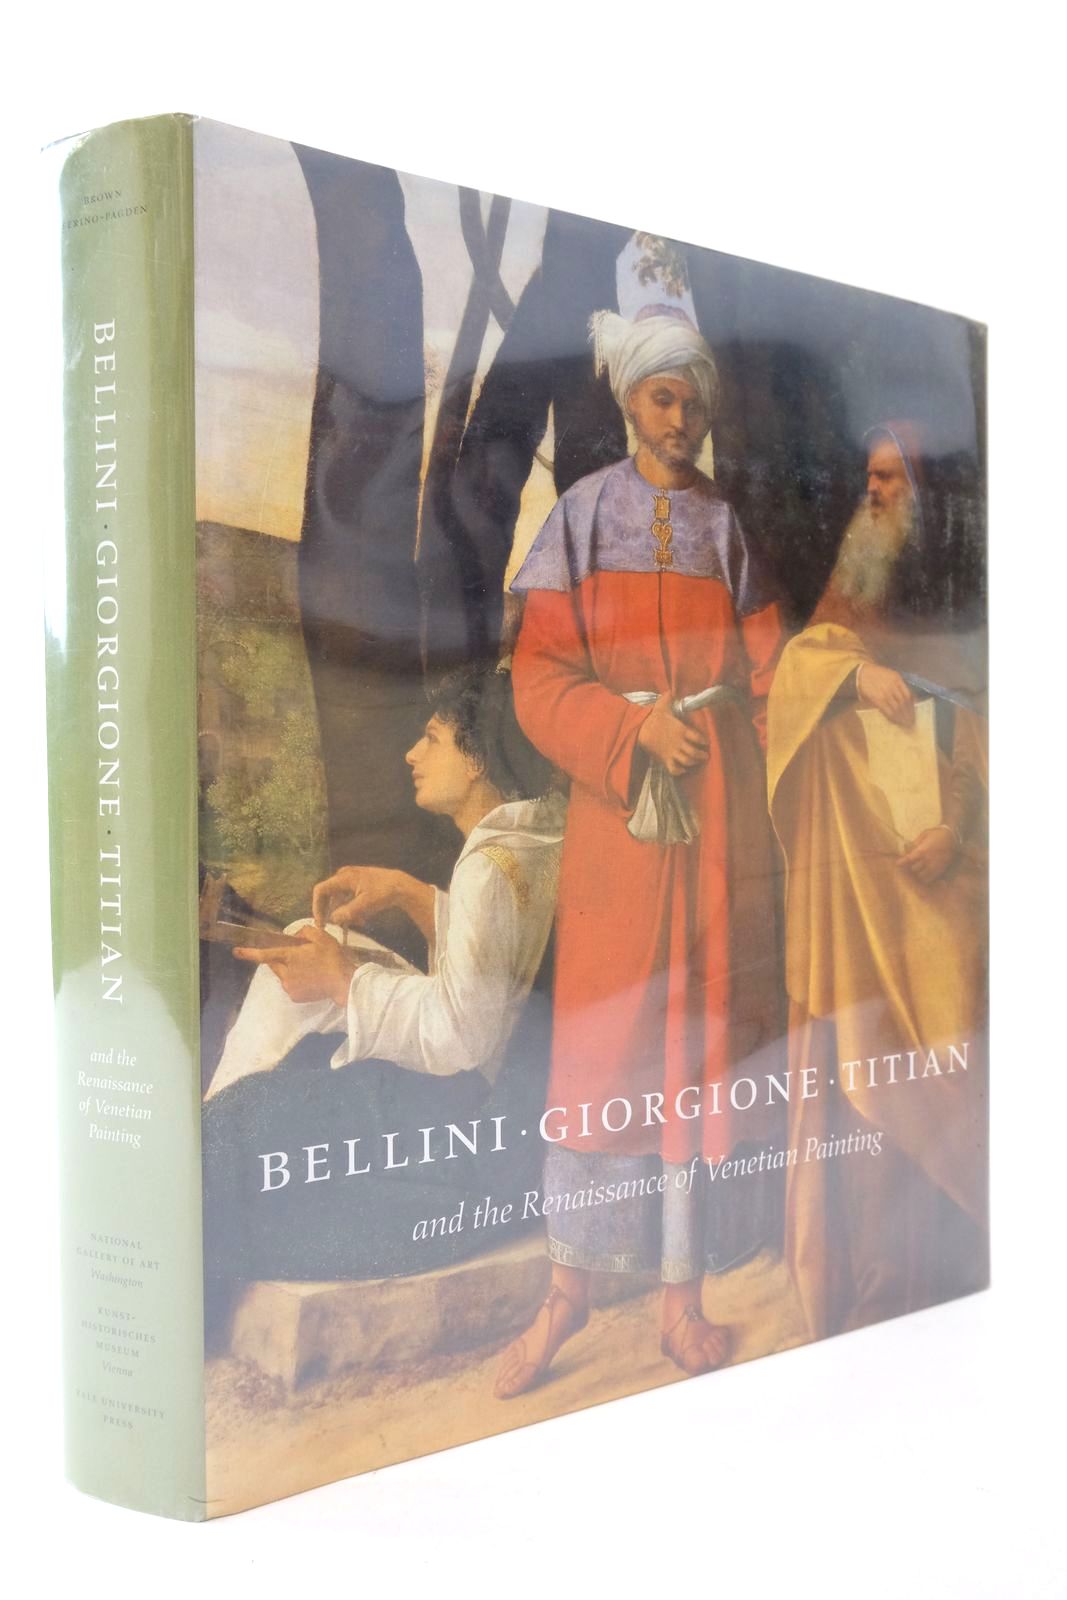 Photo of BELLINI, GIORGIONE, TITIAN AND THE RENAISSANCE OF VENETIAN PAINTING written by Brown, David Alan Ferino-Pagden, Sylvia Anderson, Jaynie Howard, Deborah Humfrey, Peter et al, illustrated by Bellini, Giovanni Giorgione, Titian, published by The National Gallery Of Art, Washington, Kunsthistorisches Museum Wien, Yale University Press (STOCK CODE: 2139017)  for sale by Stella & Rose's Books